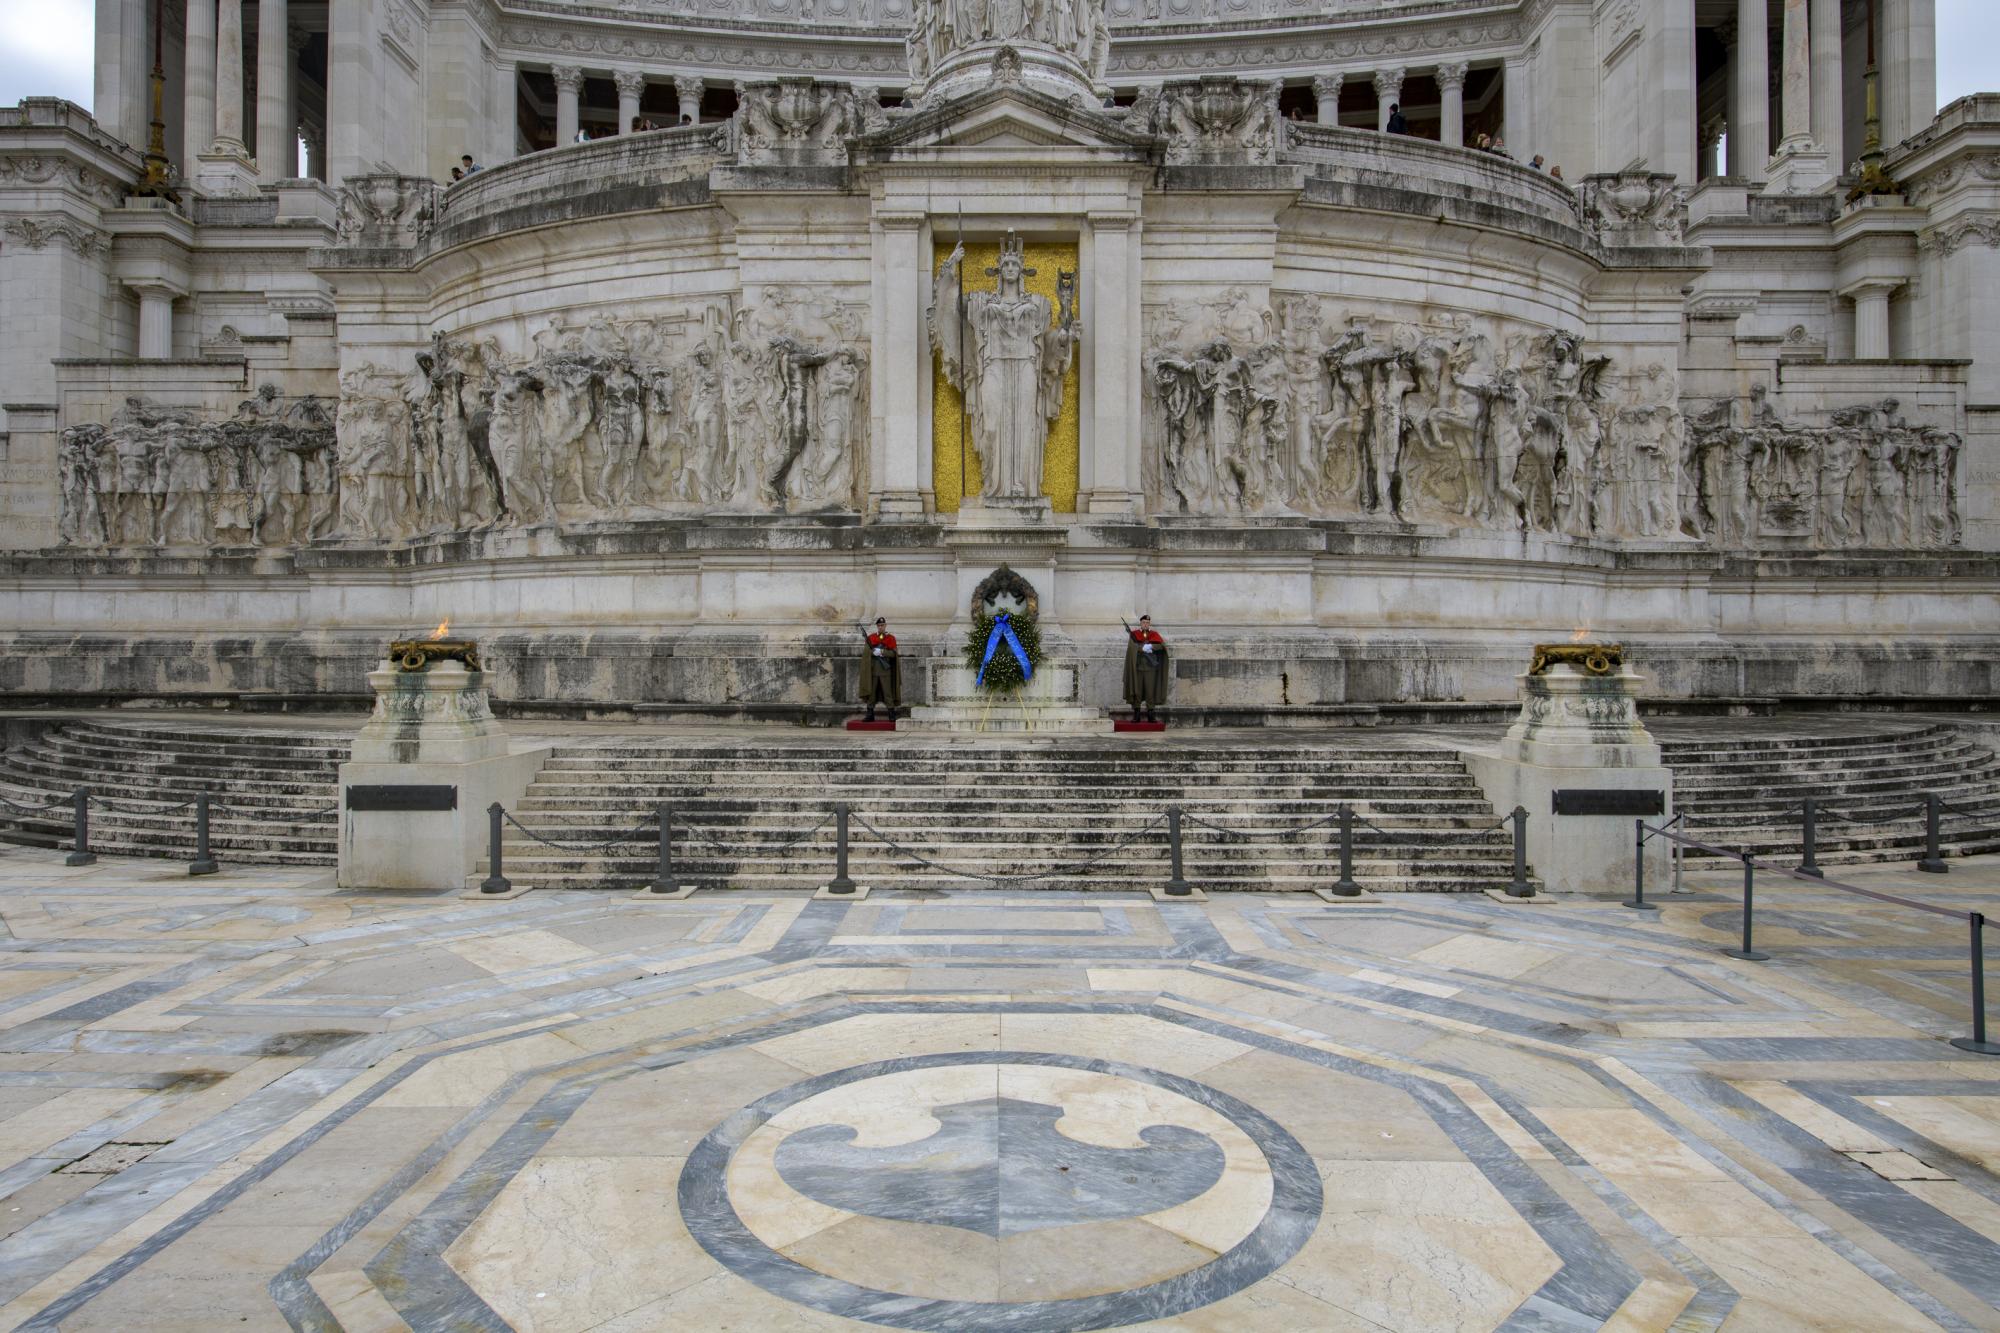 The Altar of the Fatherland (photograph by Antonio Idini)
